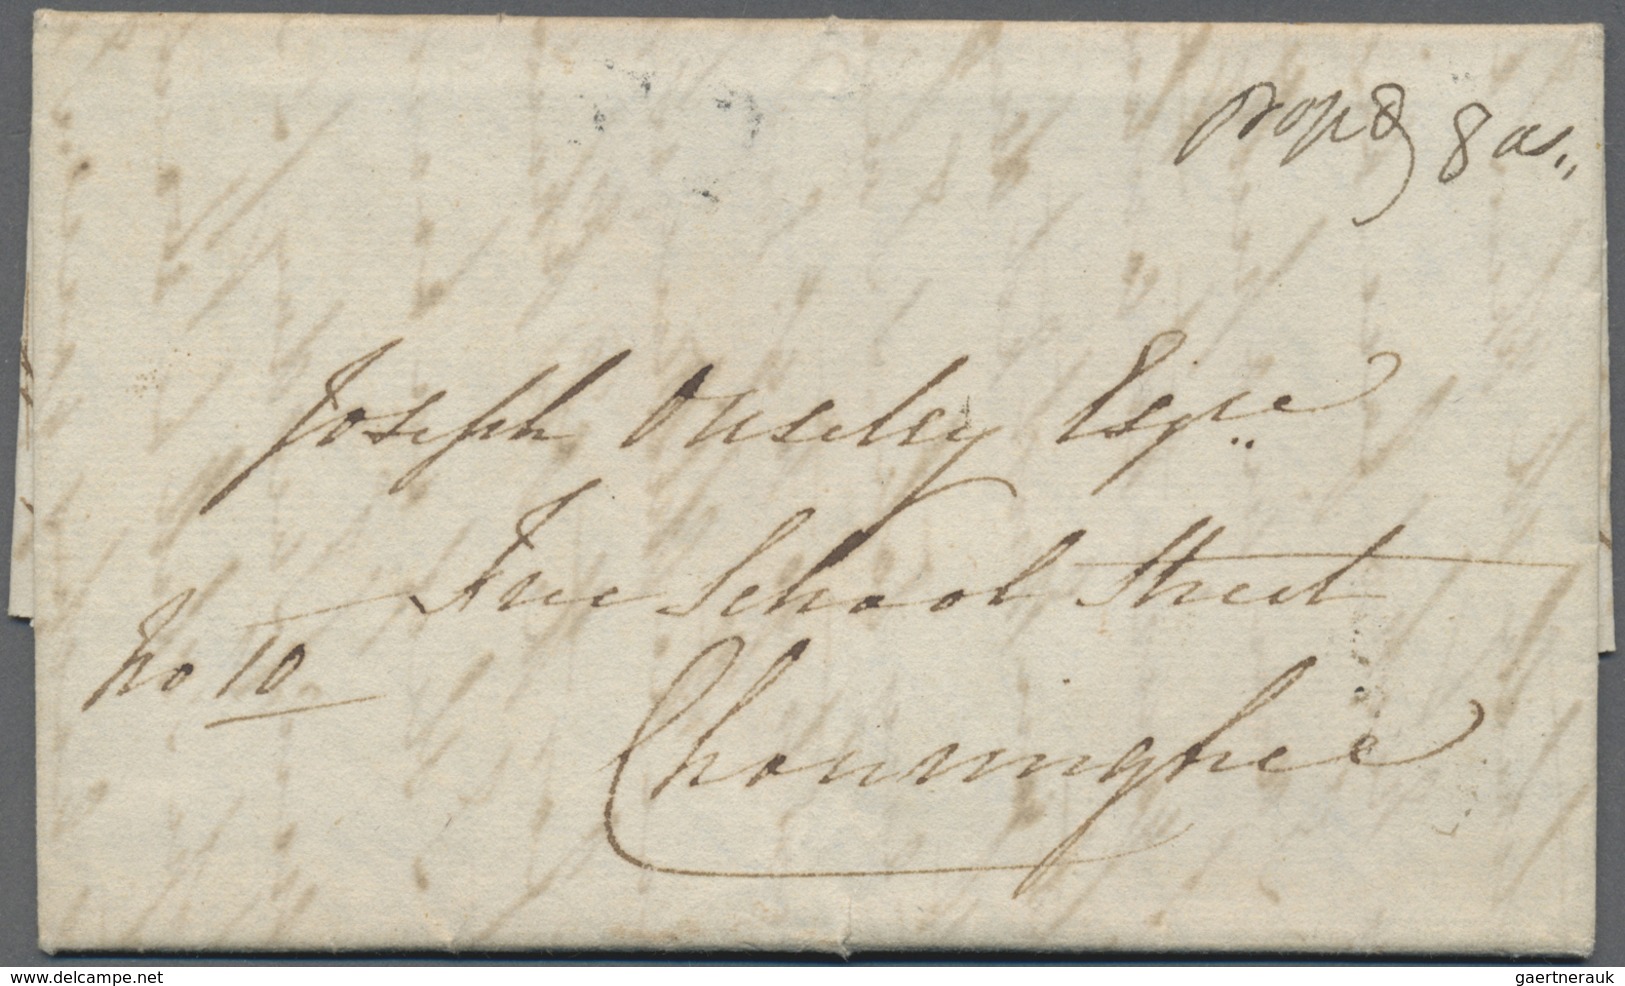 Br Indien - Vorphilatelie: 1827 (17 June): Entire Letter From Sultanpore To Calcutta Posted At Benares - ...-1852 Prephilately